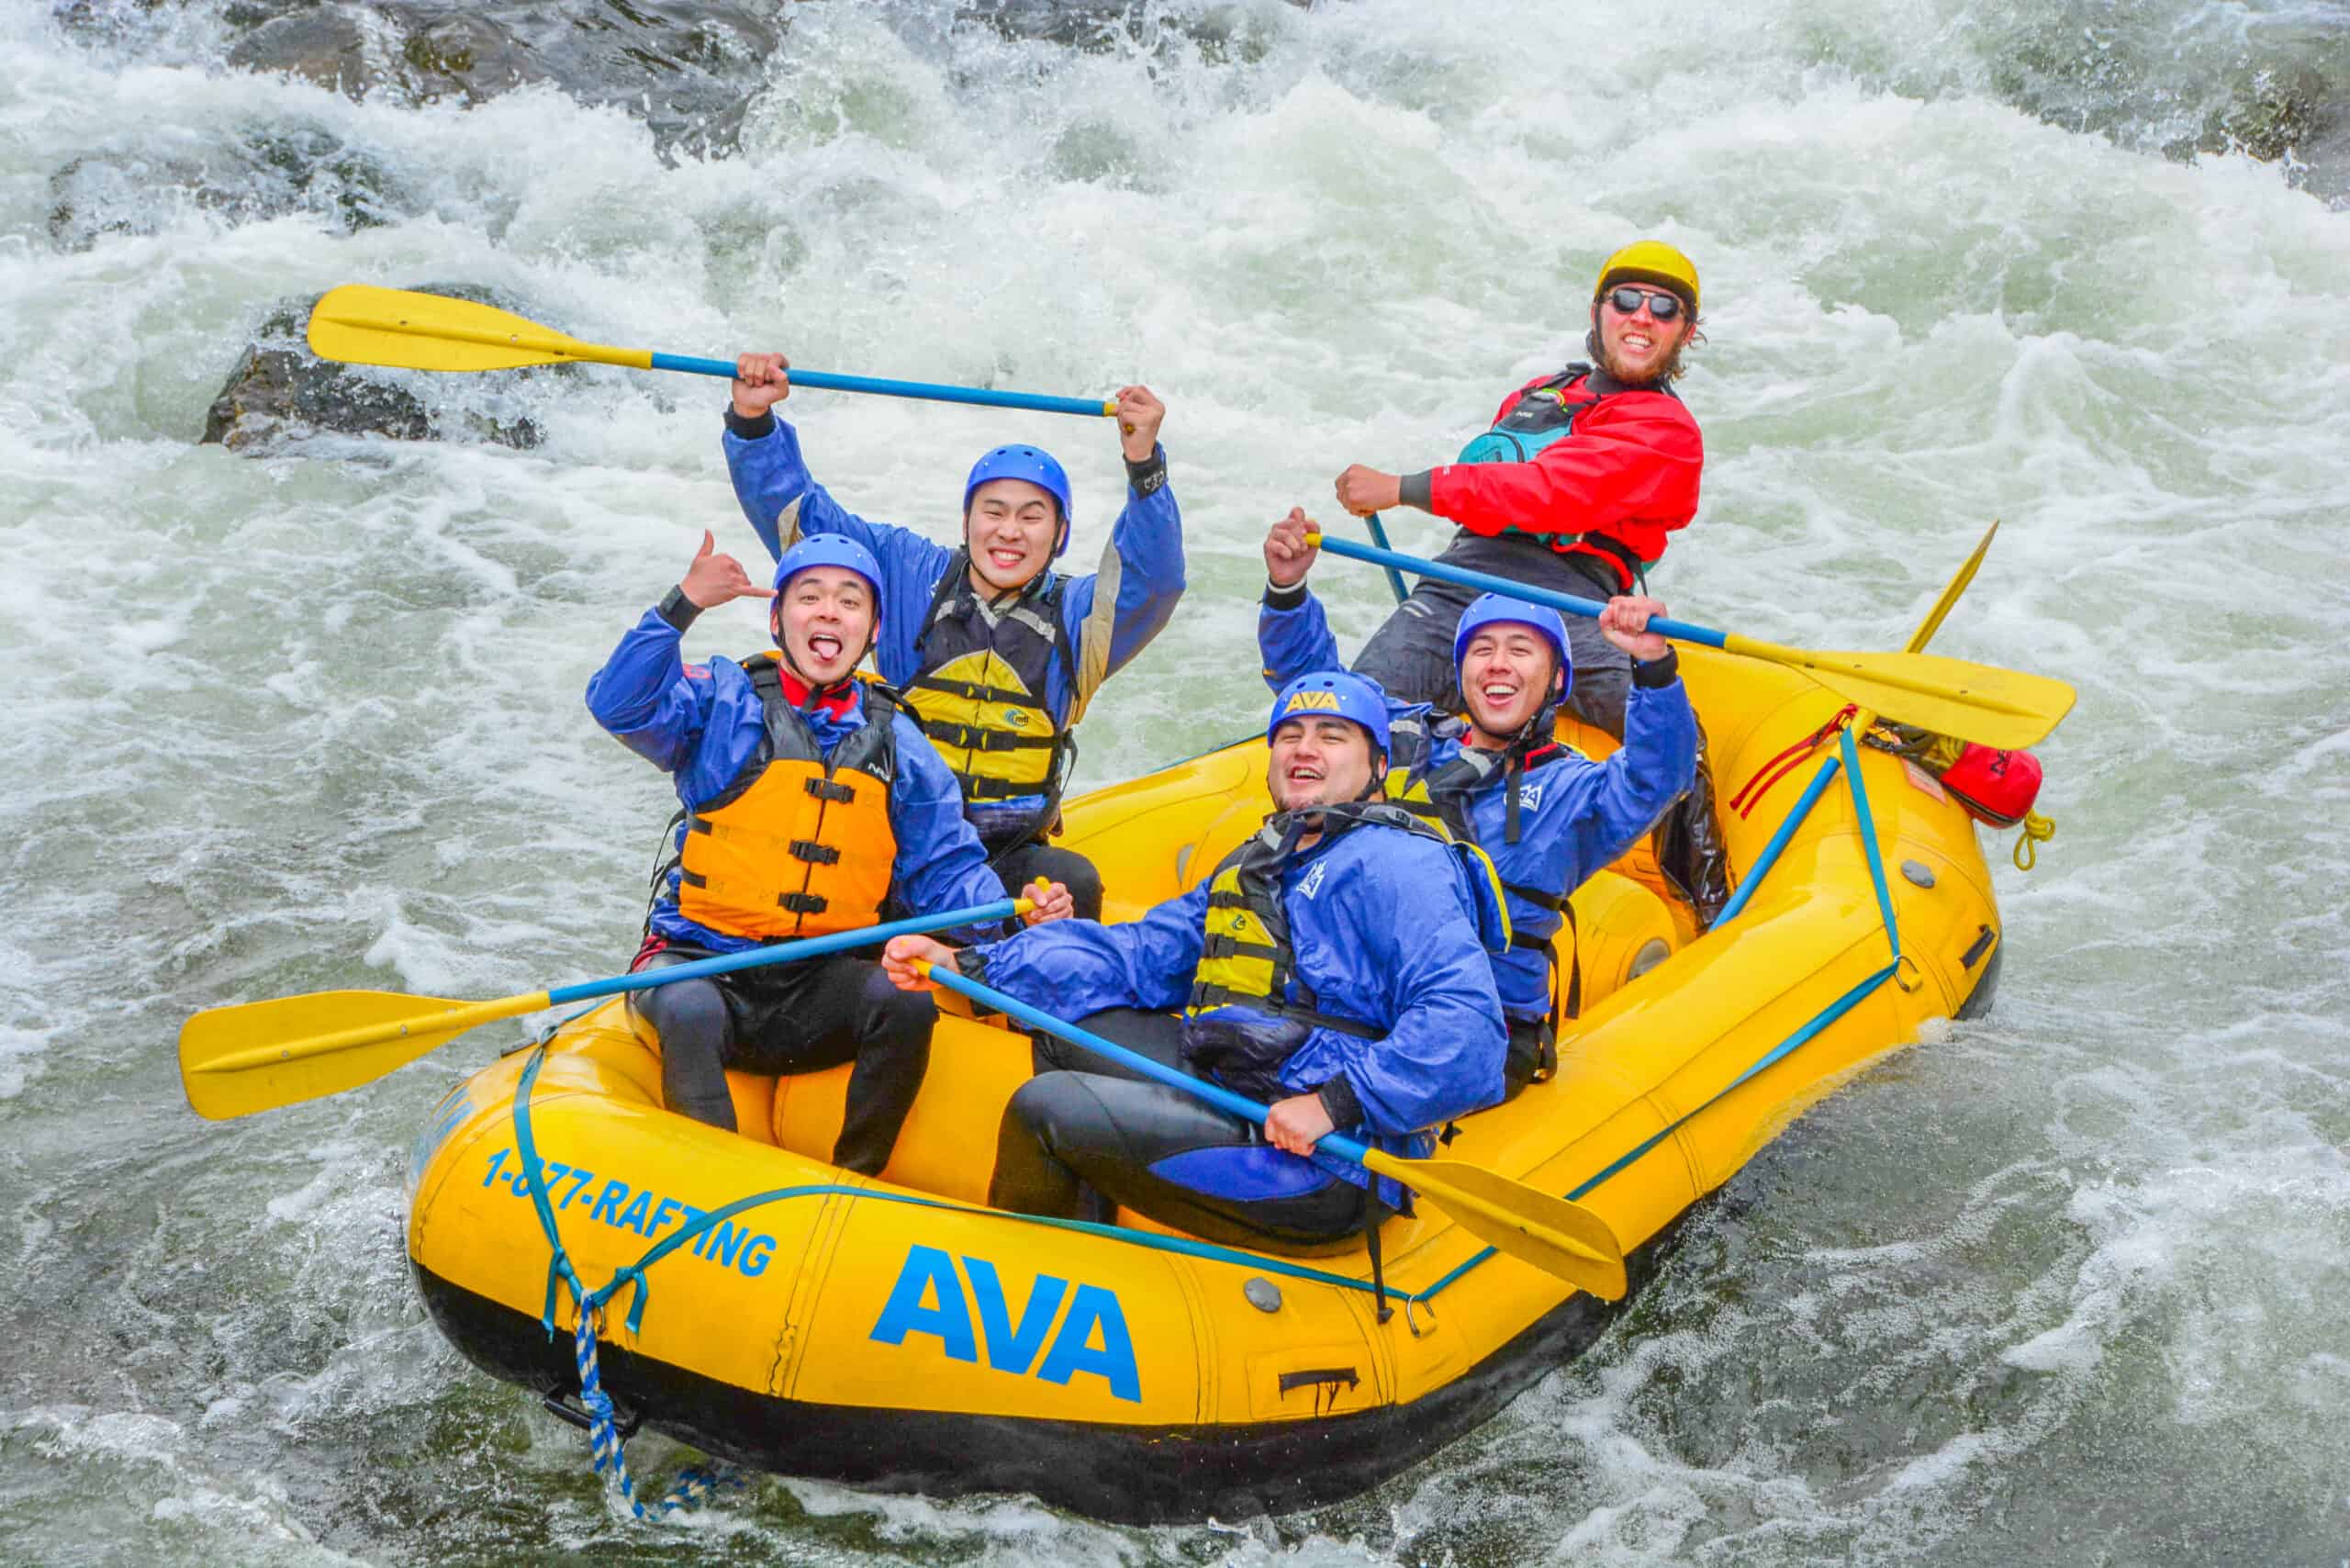 Rafting group having a blast, paddles in the air